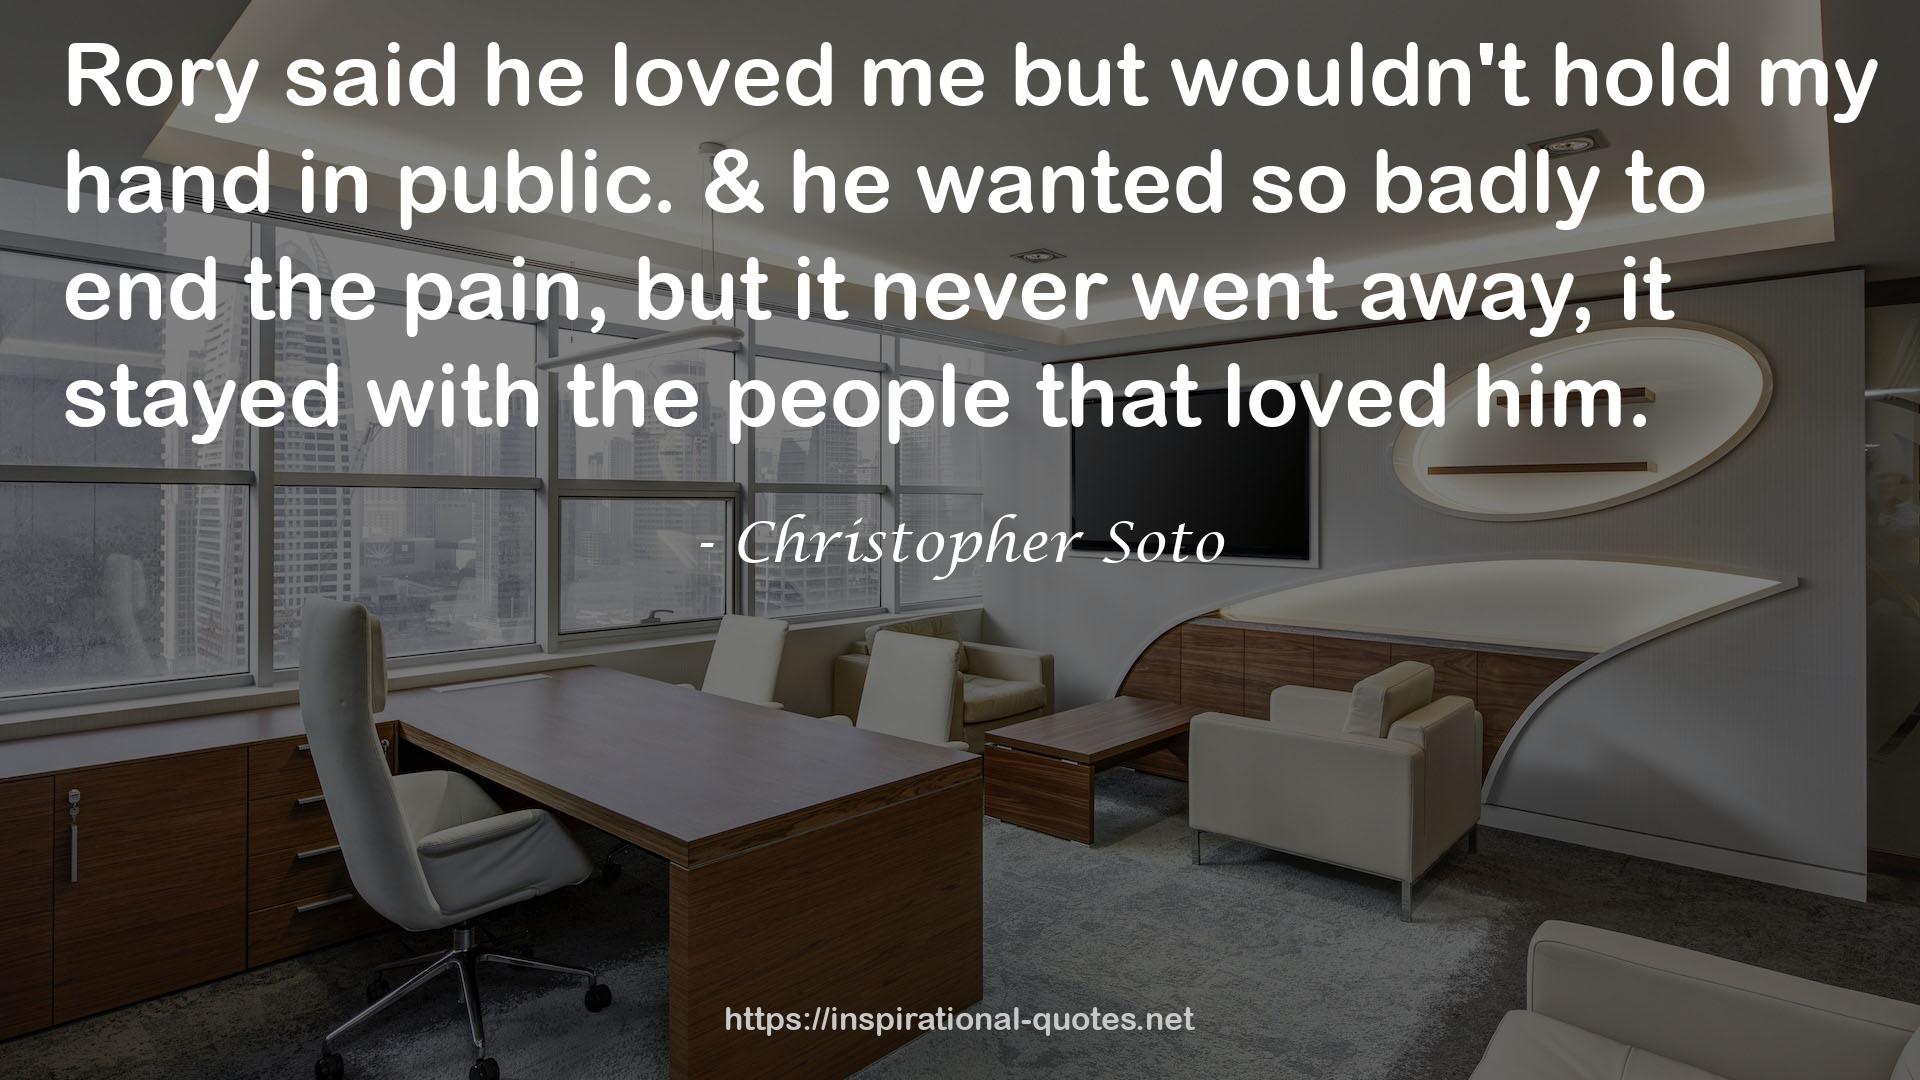 Christopher Soto QUOTES